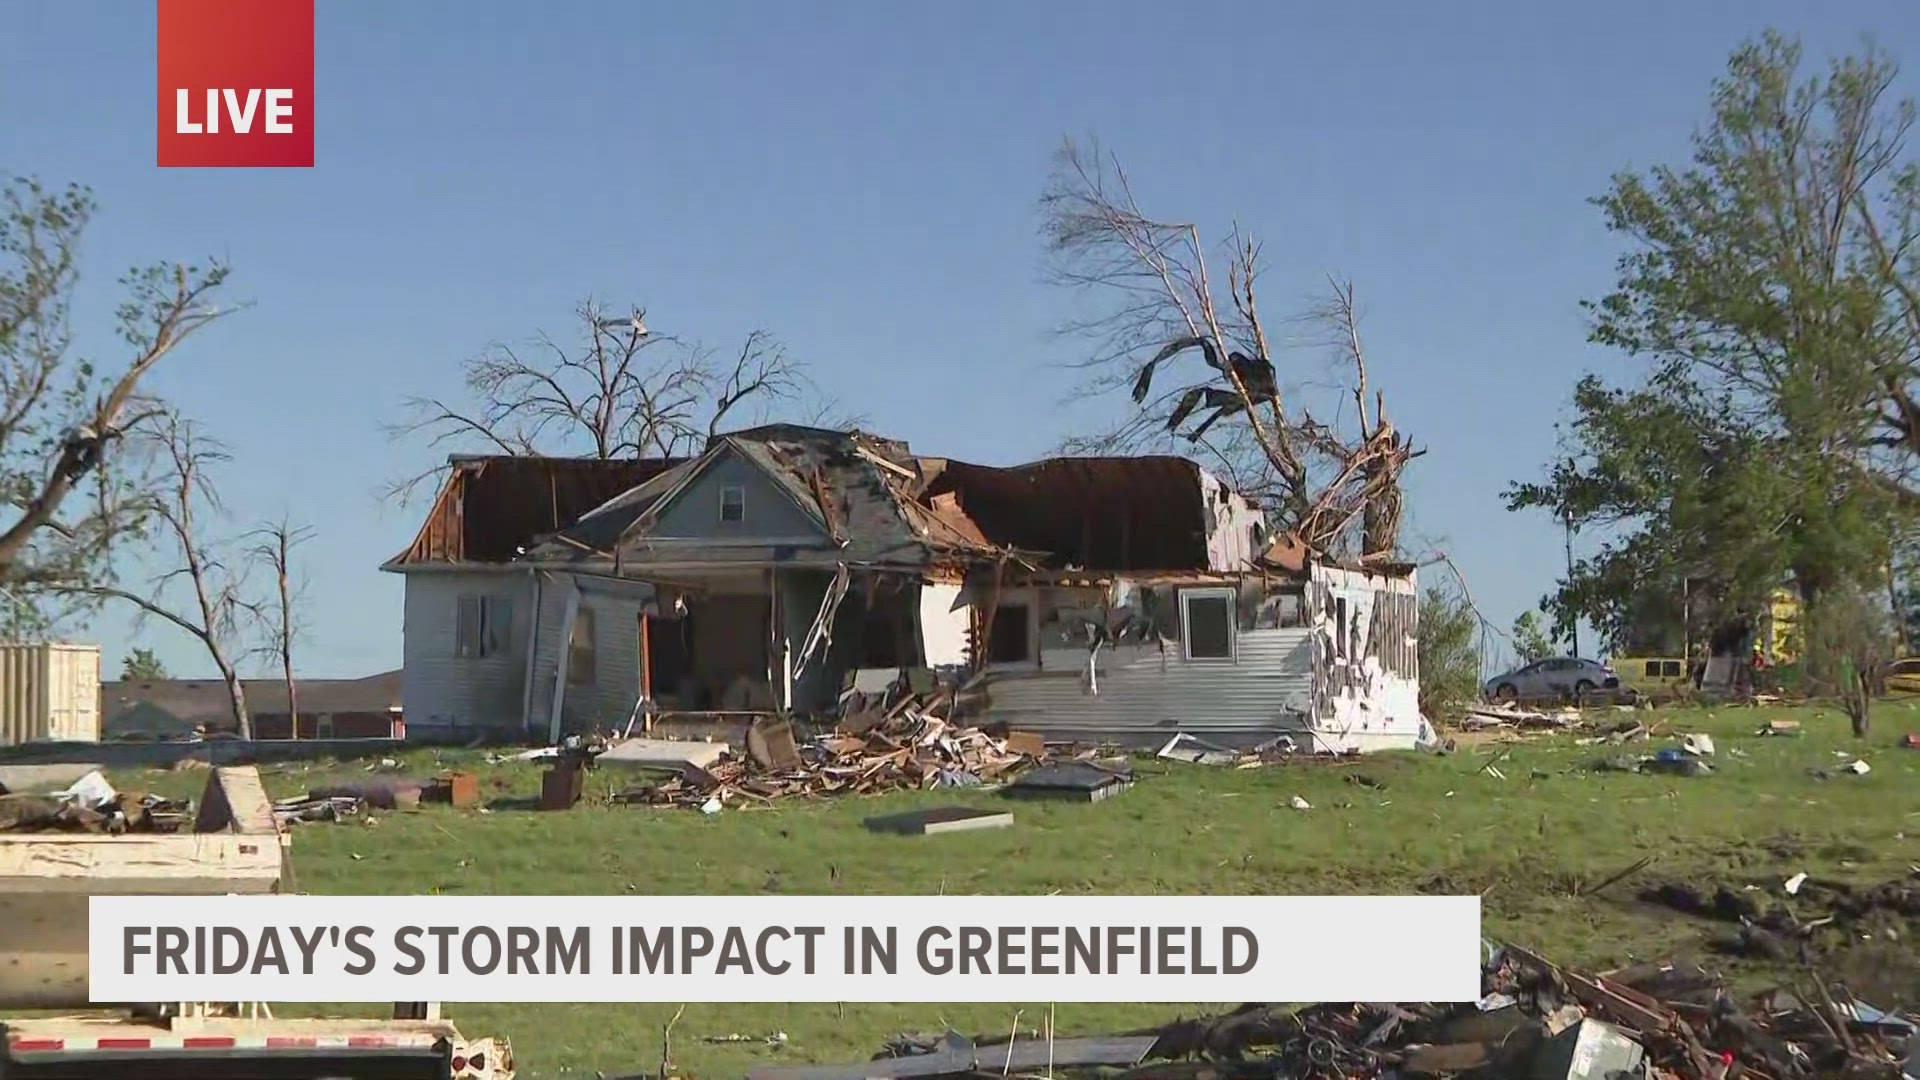 Days after a powerful EF-4 tornado tore through town, killing five people in the area, another round of severe weather impacted the community of Greenfield Friday.